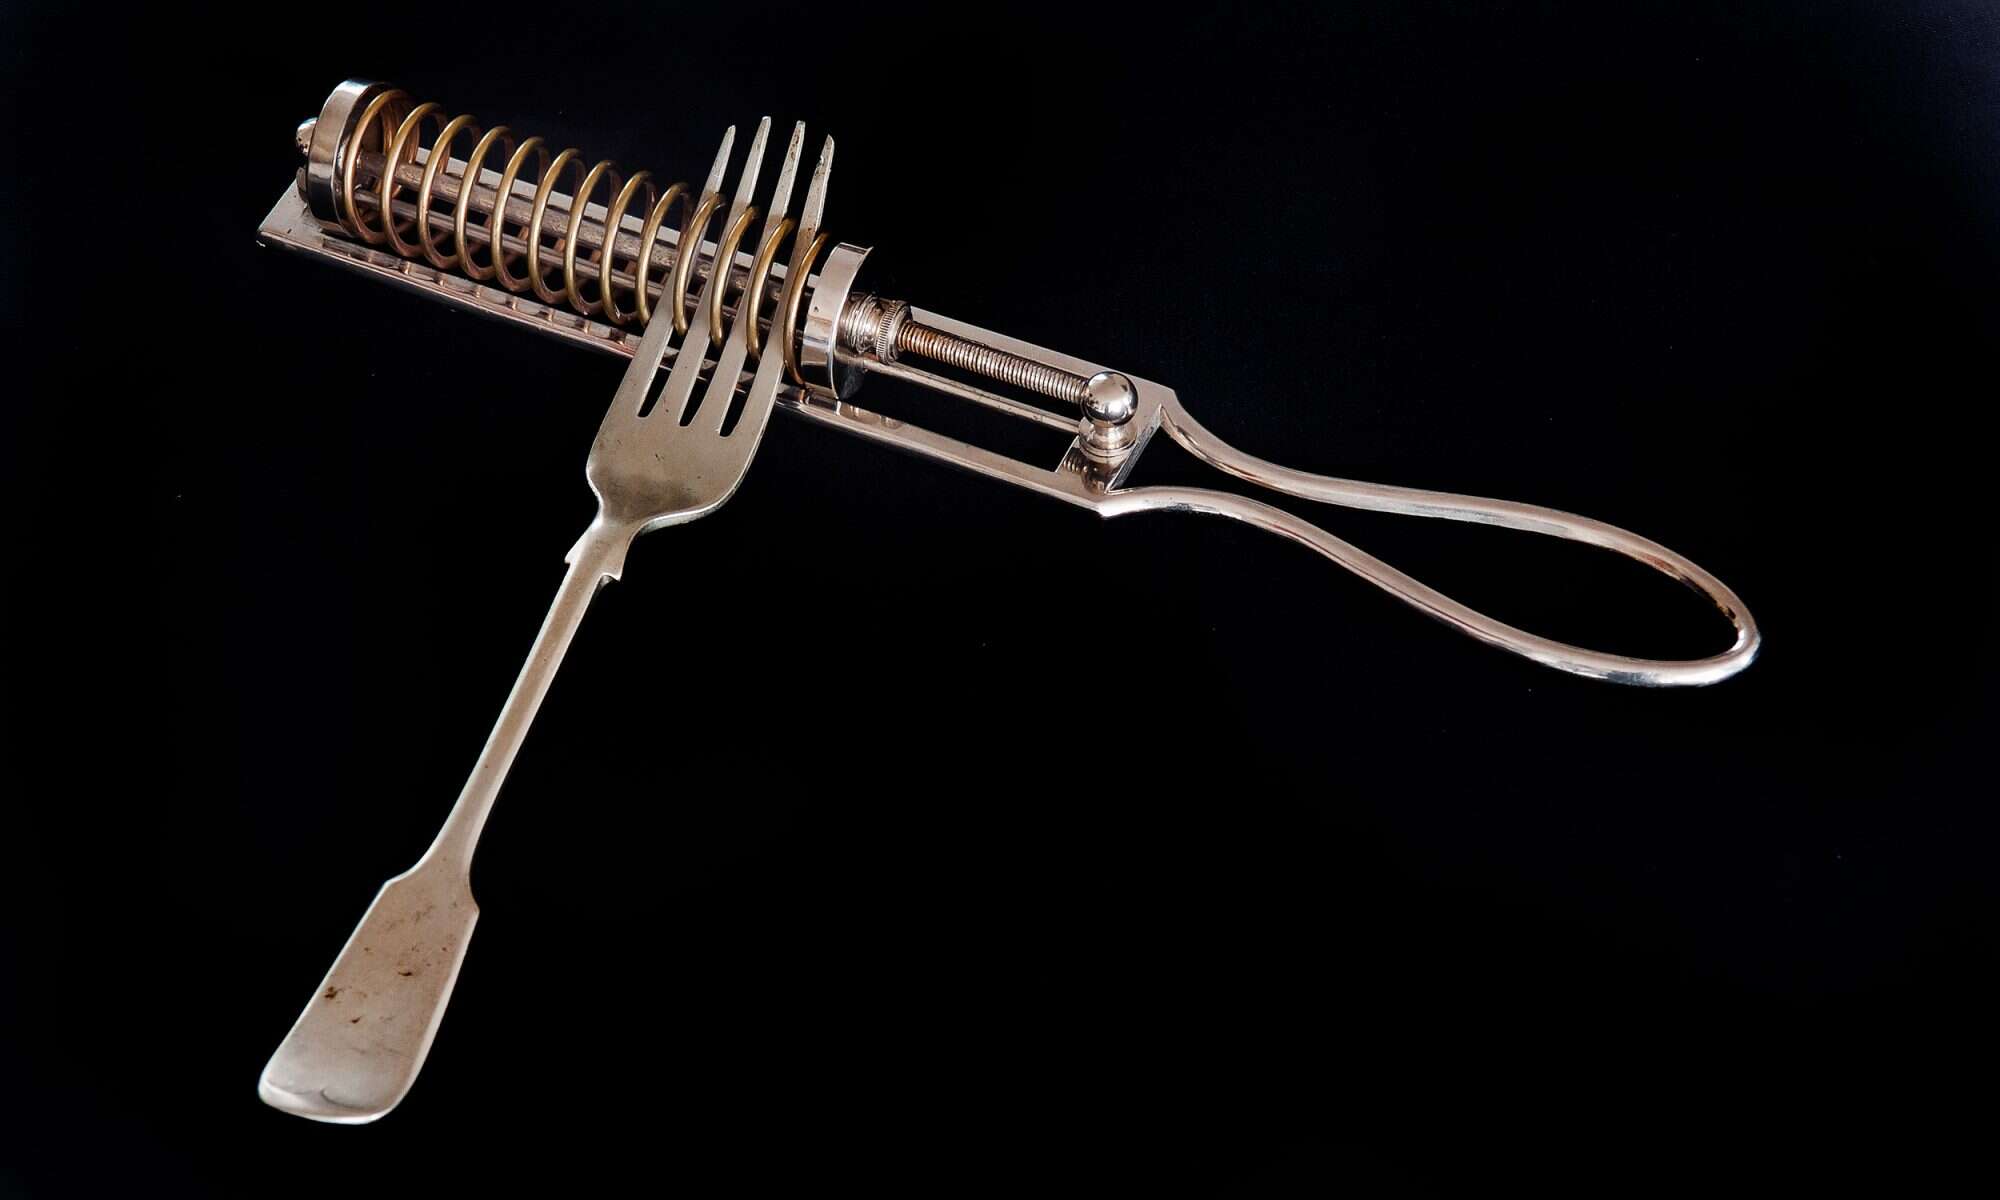 These Old Kitchen Gadgets Look Strange but People Actually Used